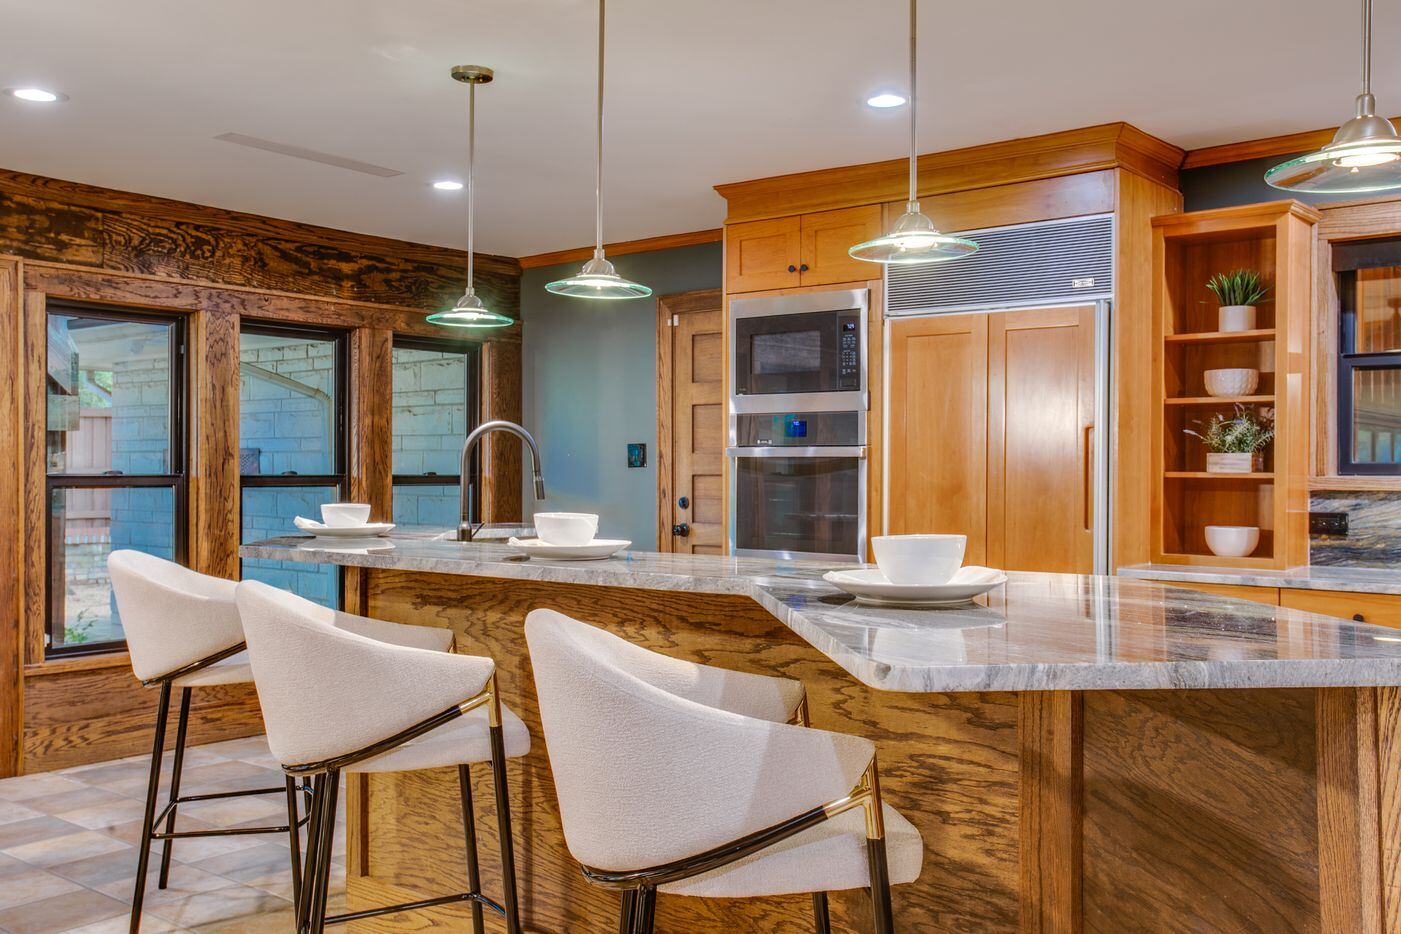 The modern kitchen features similar wood tones as that around the fireplace.